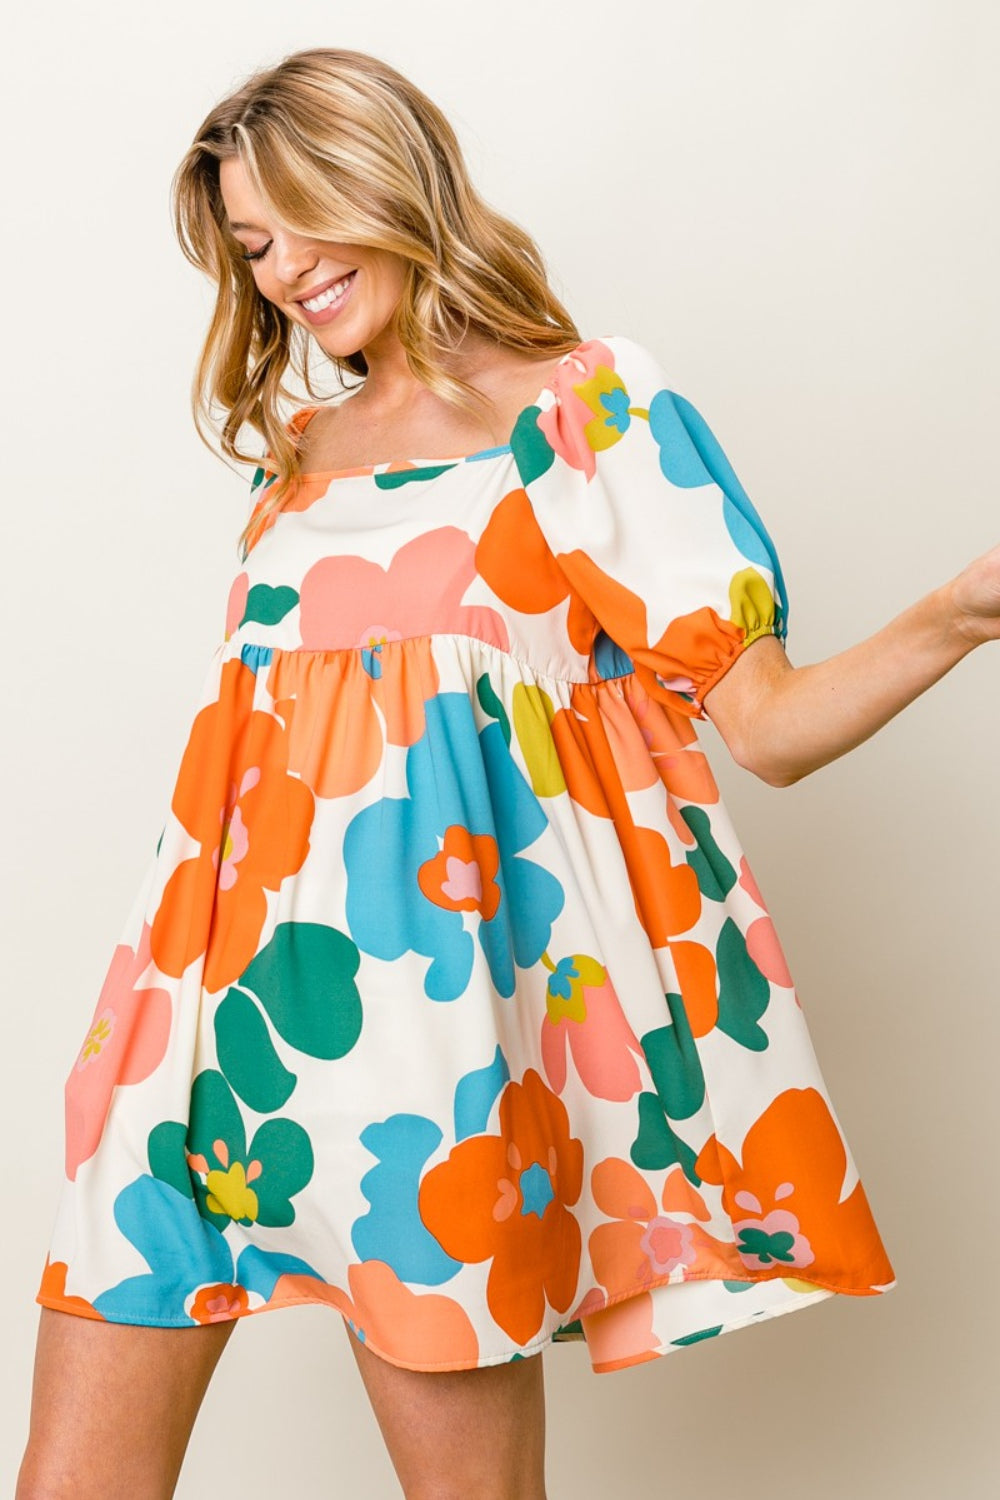 Shop the BiBi Floral Puff Sleeve Mini Dress - your go-to for a vibrant, easy-to-wear spring look that flatters and charms